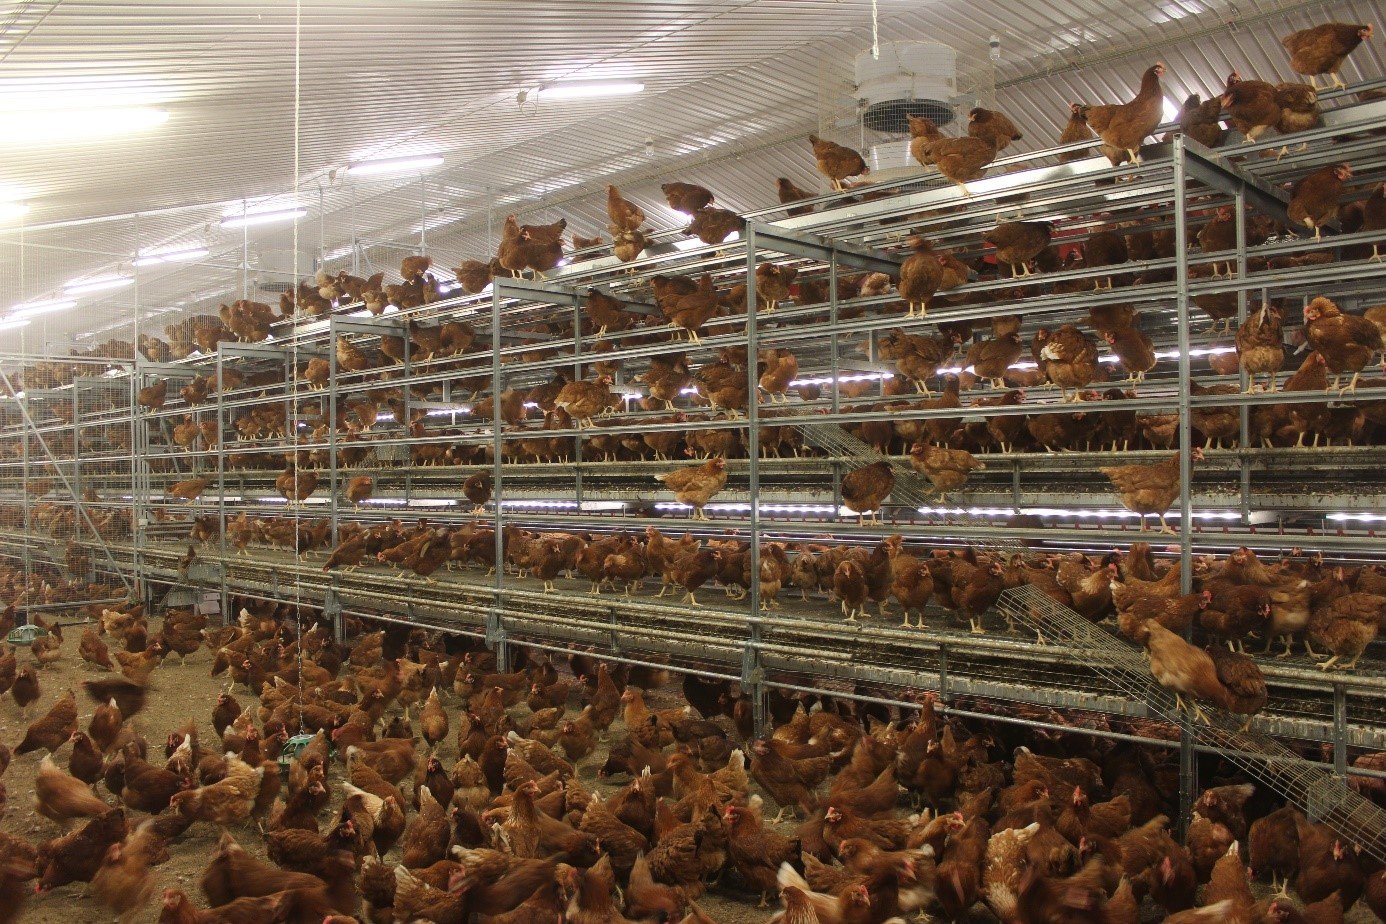 II. The Importance of Hens in Traditional Farming Practices